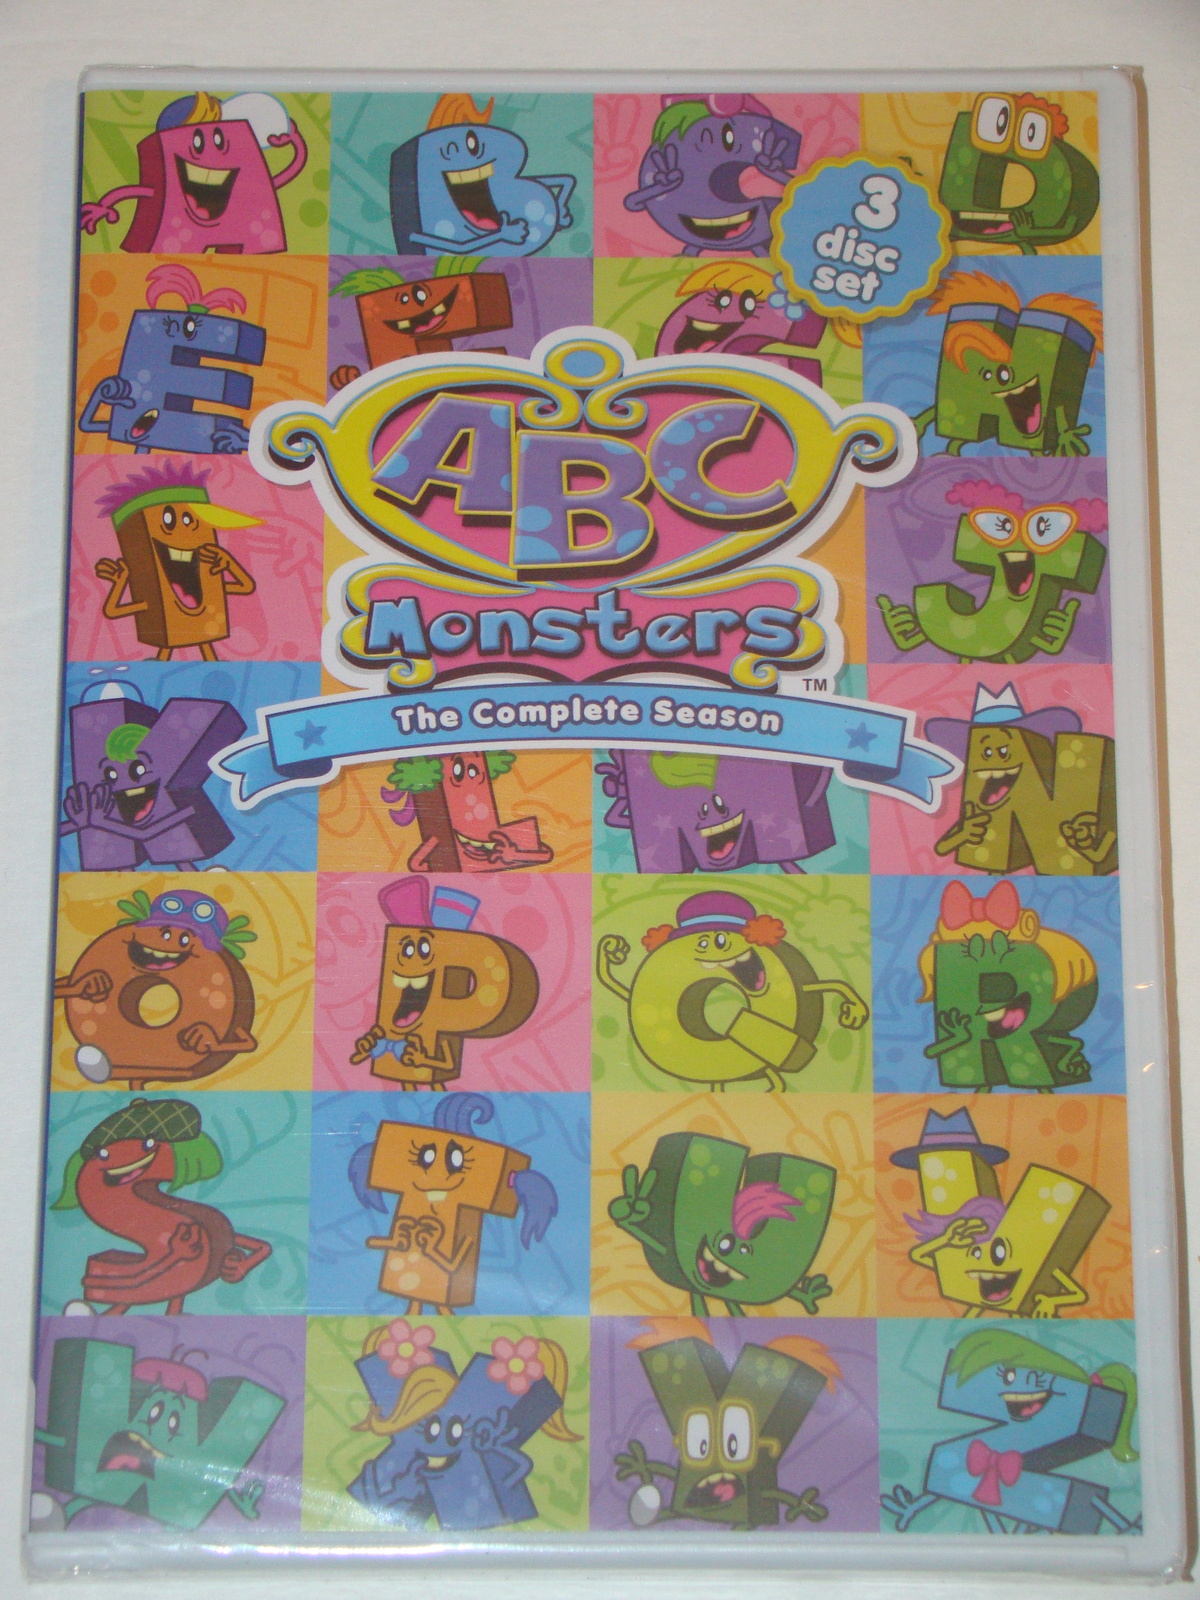 ABC Monsters - The Complete Season - 3 Disc Set (Dvd) (Sealed) - $18.00